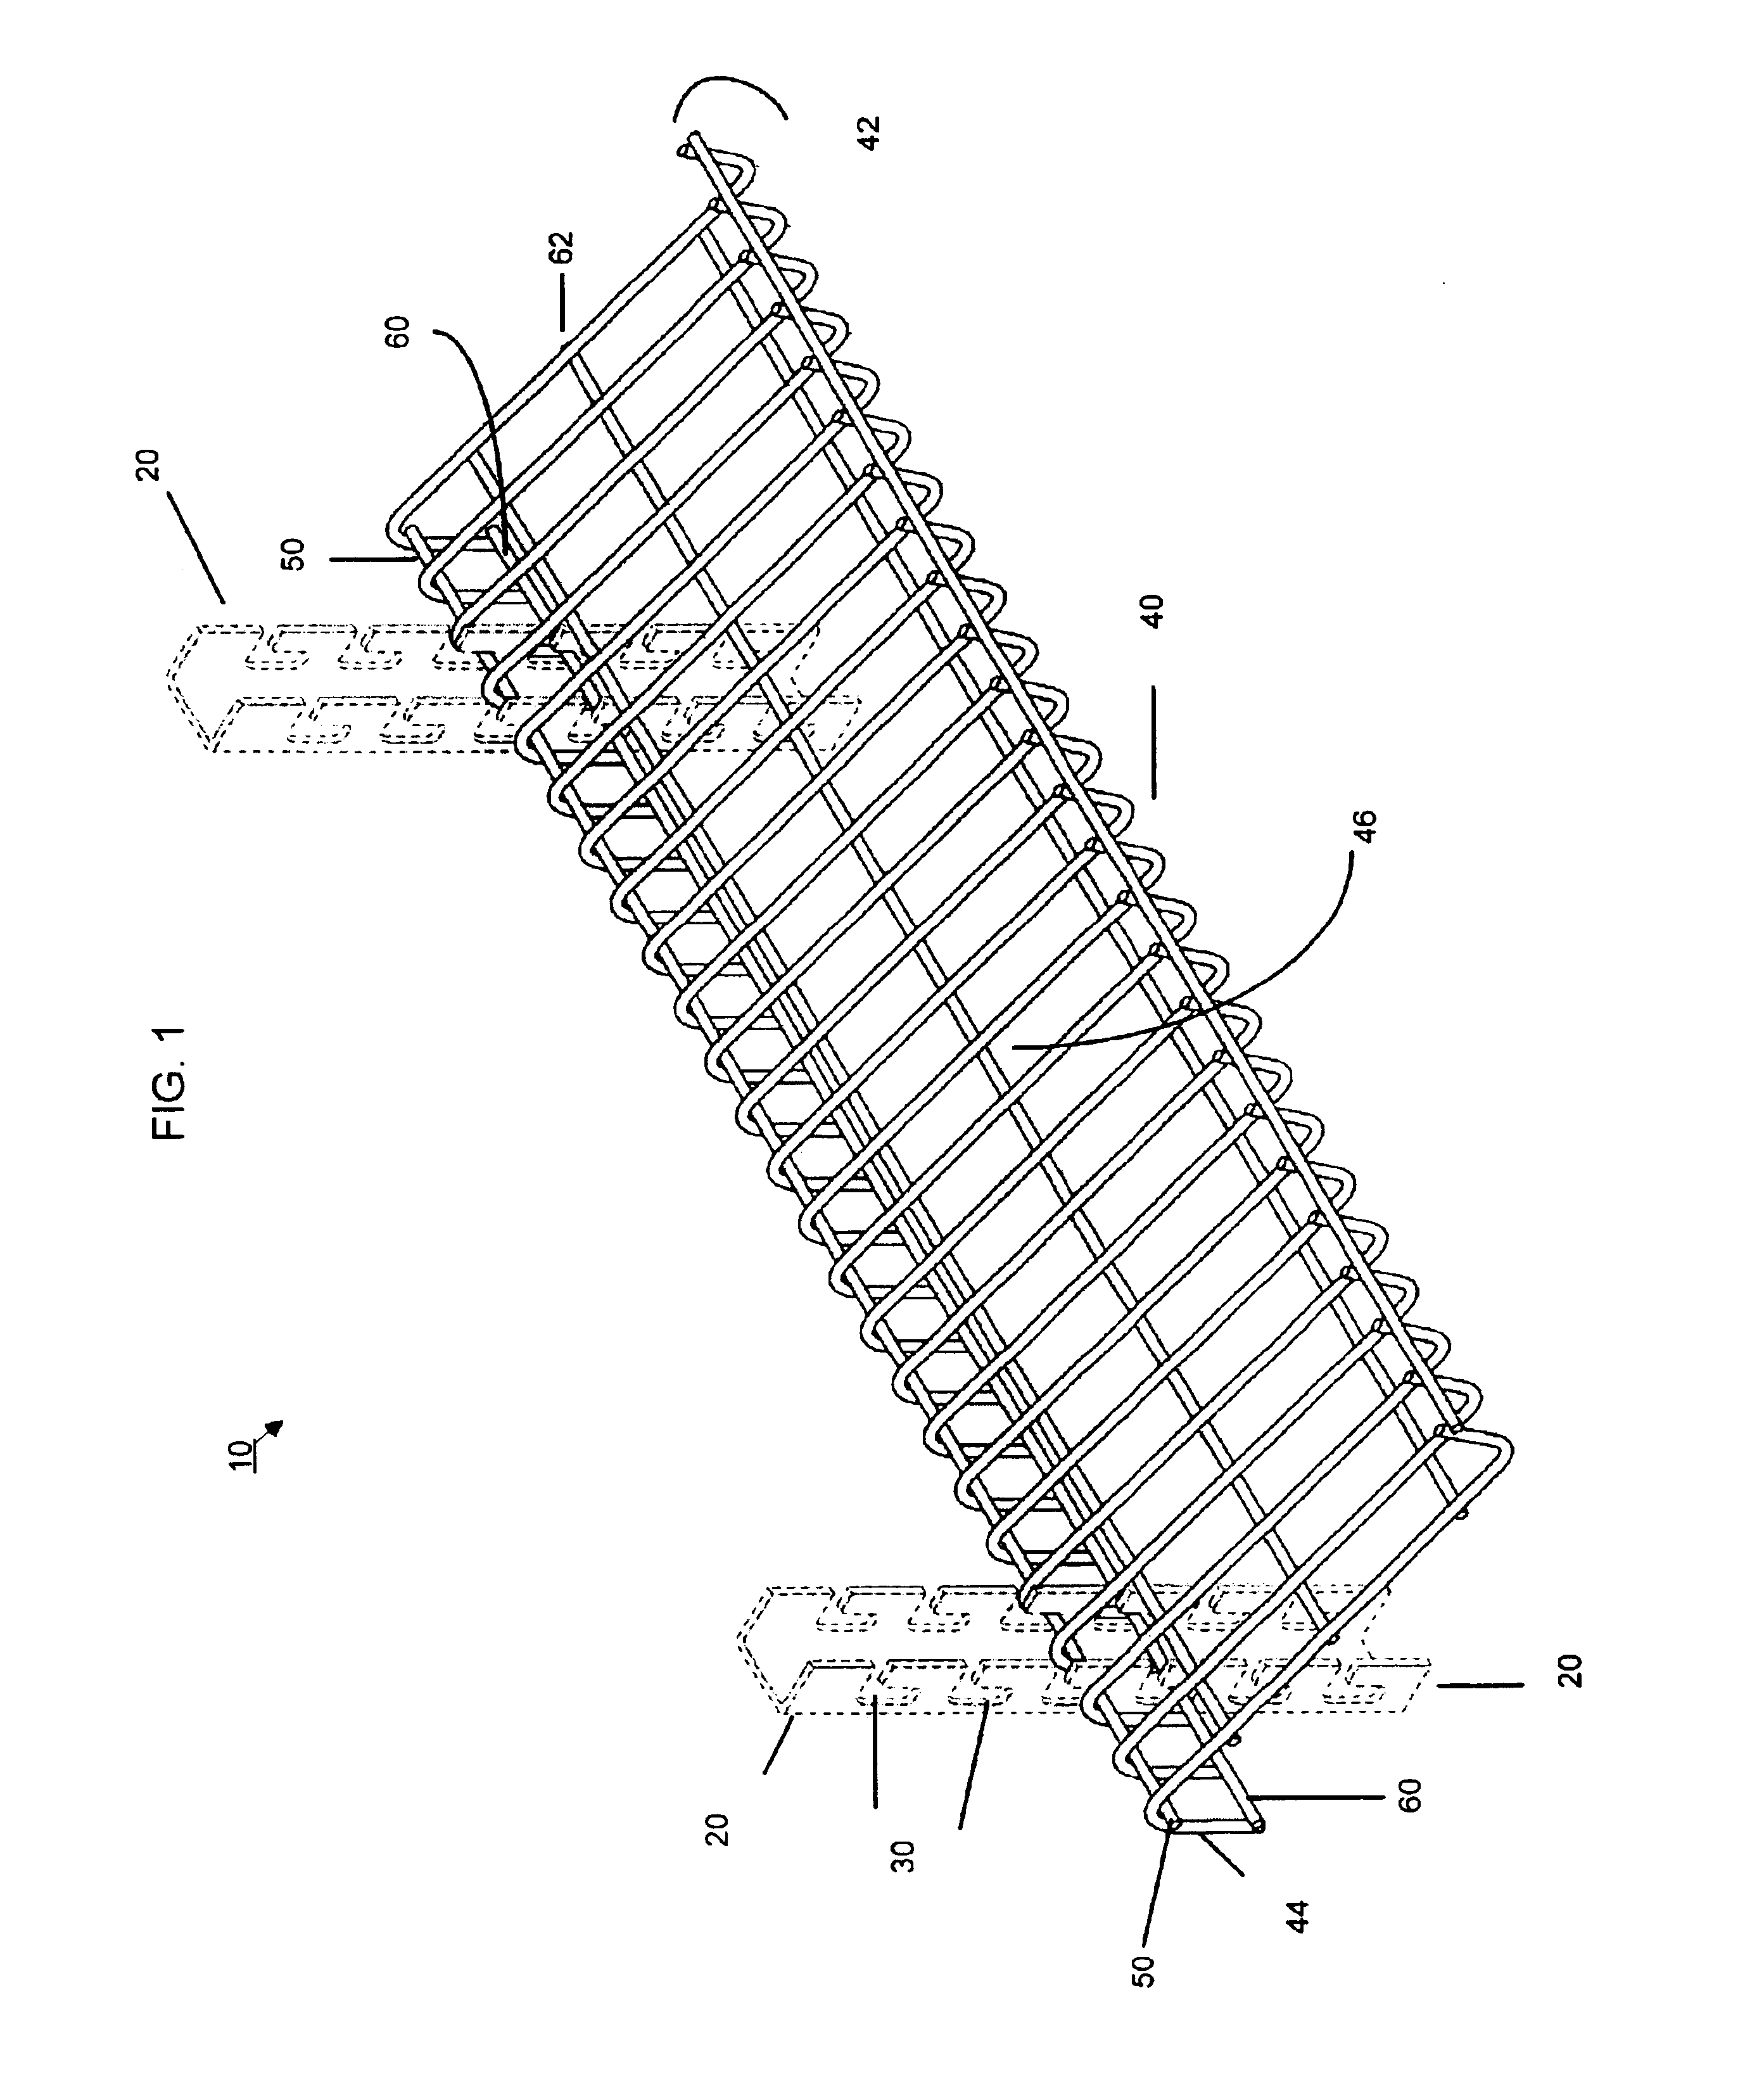 Method and apparatus for a wire shelf hooking onto slotted brackets